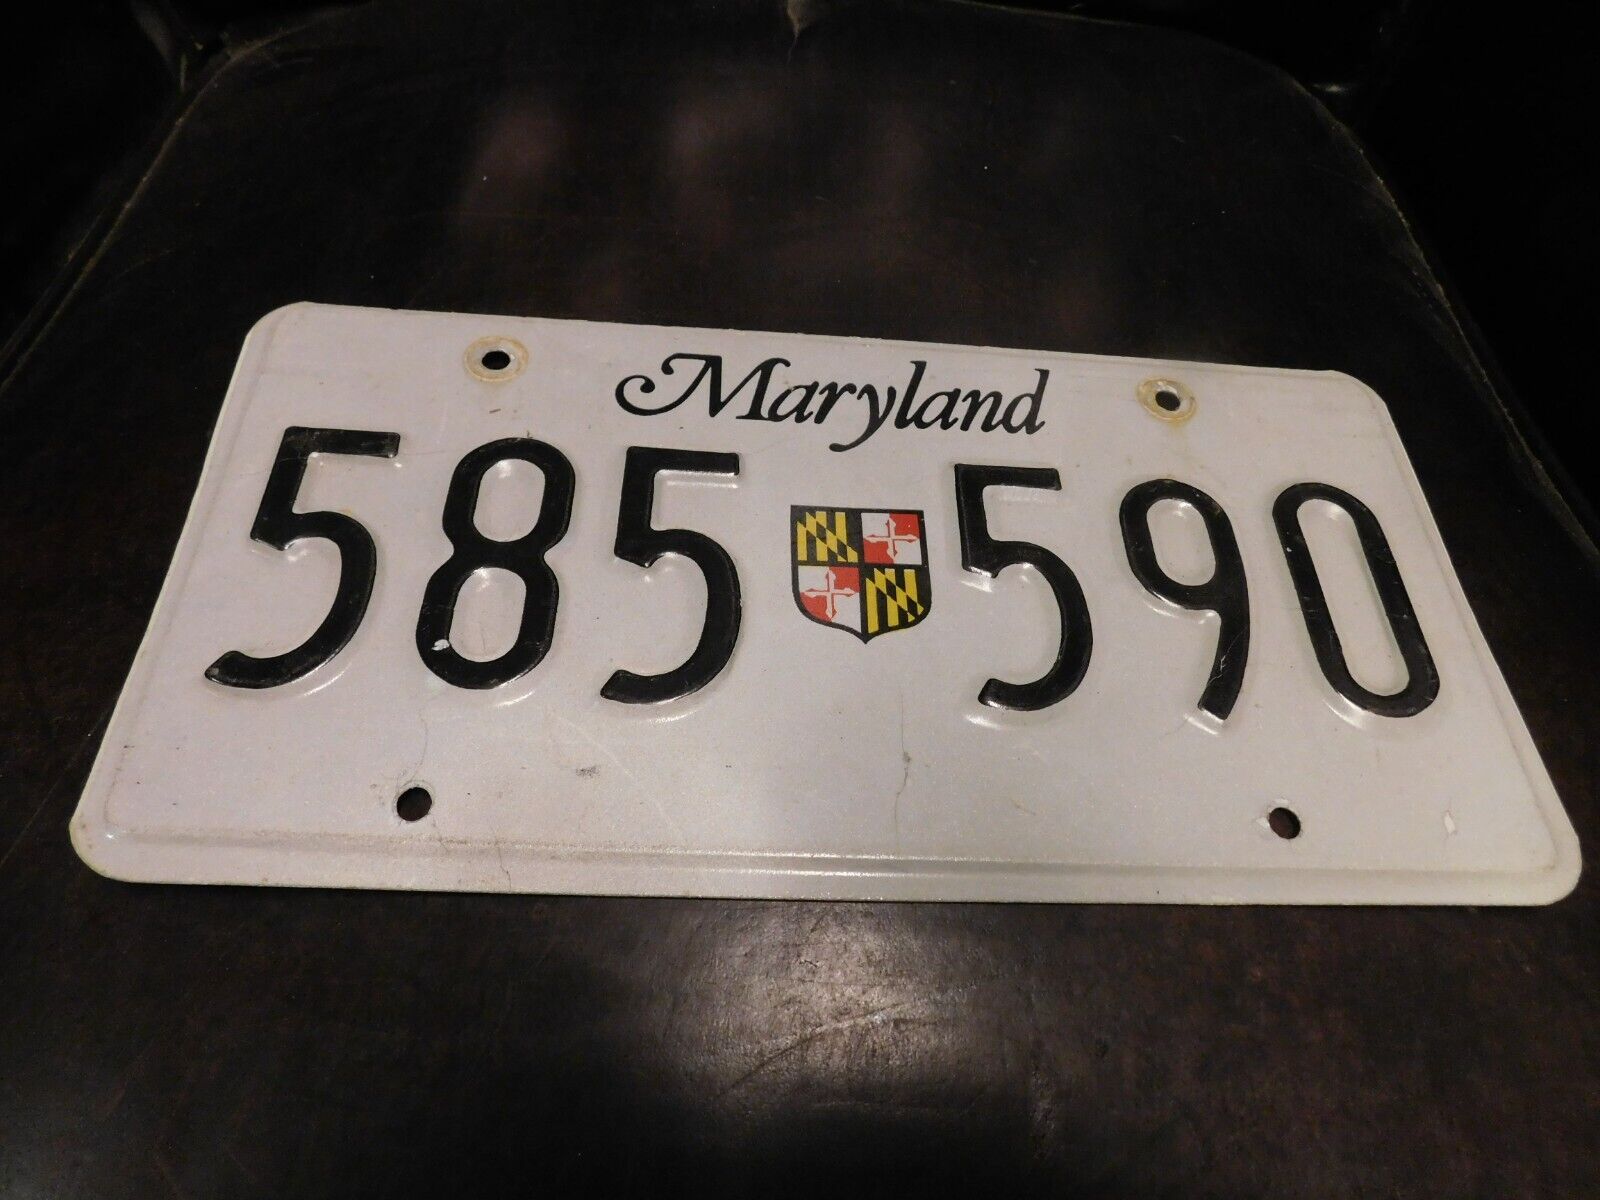 Maryland License Plate MD # 585 590 Truck Tag 1985 Hologram Expired in 2017